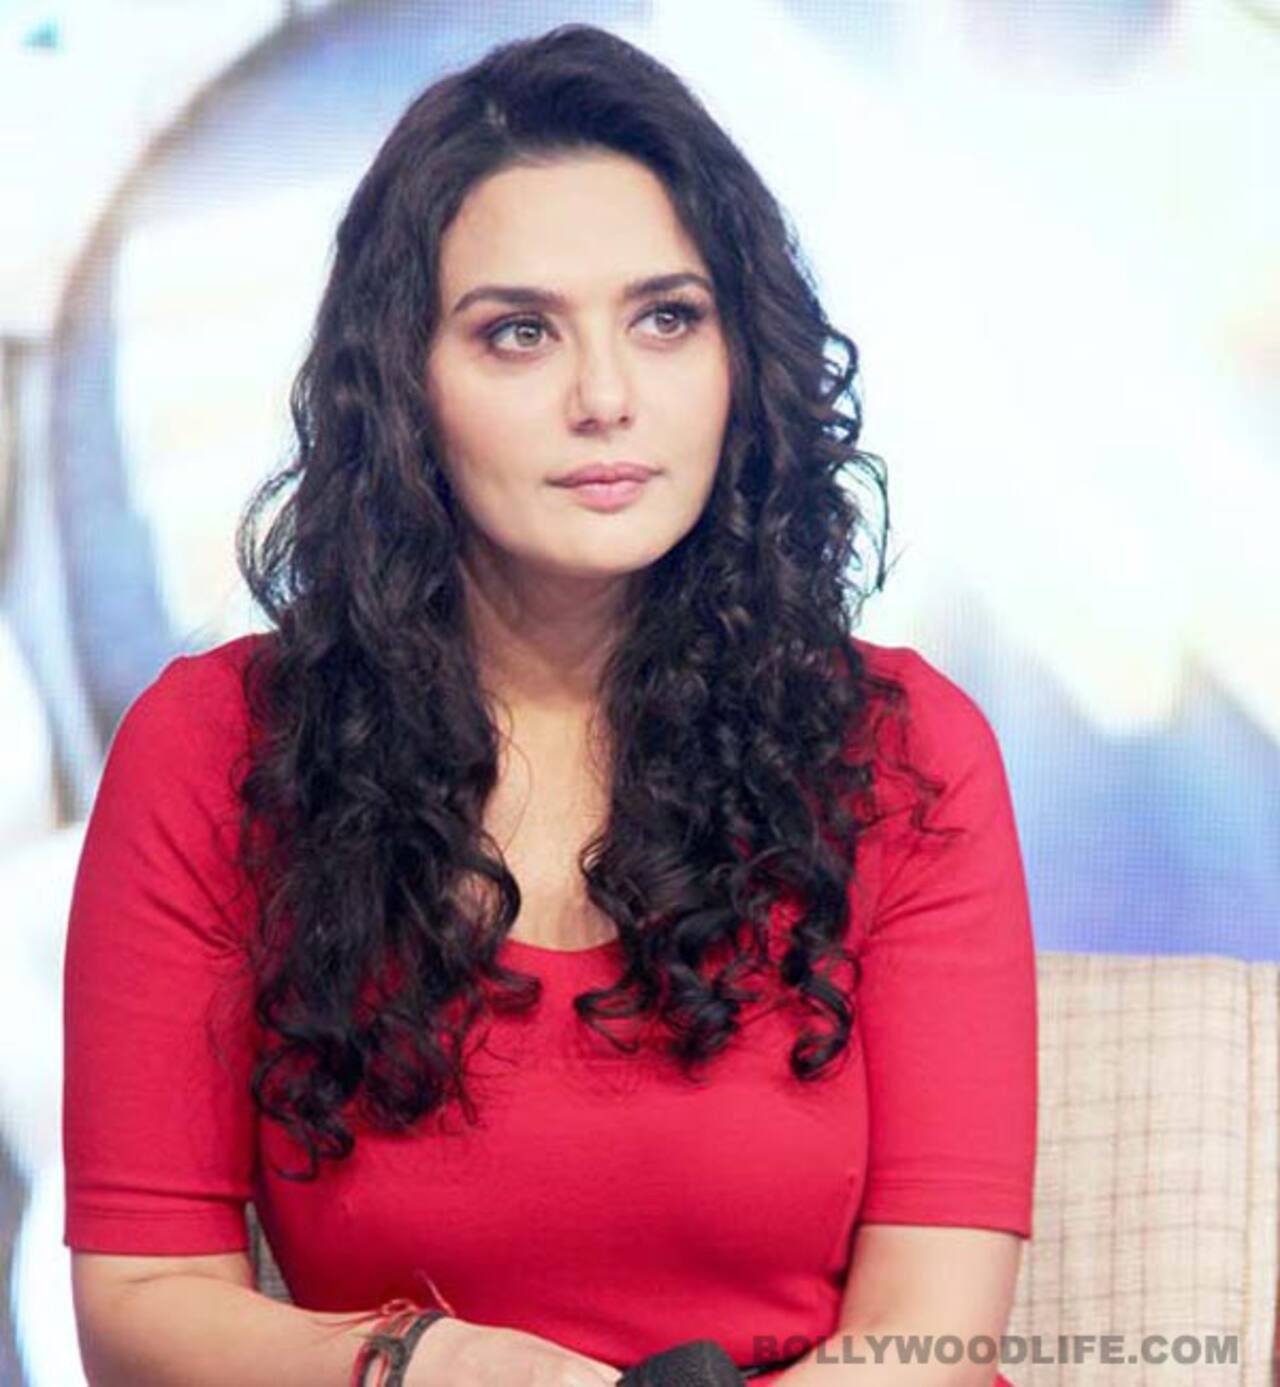 Preity Zinta To Sell Her Ipl Stake And Move To Us Bollywood News And Gossip Movie Reviews